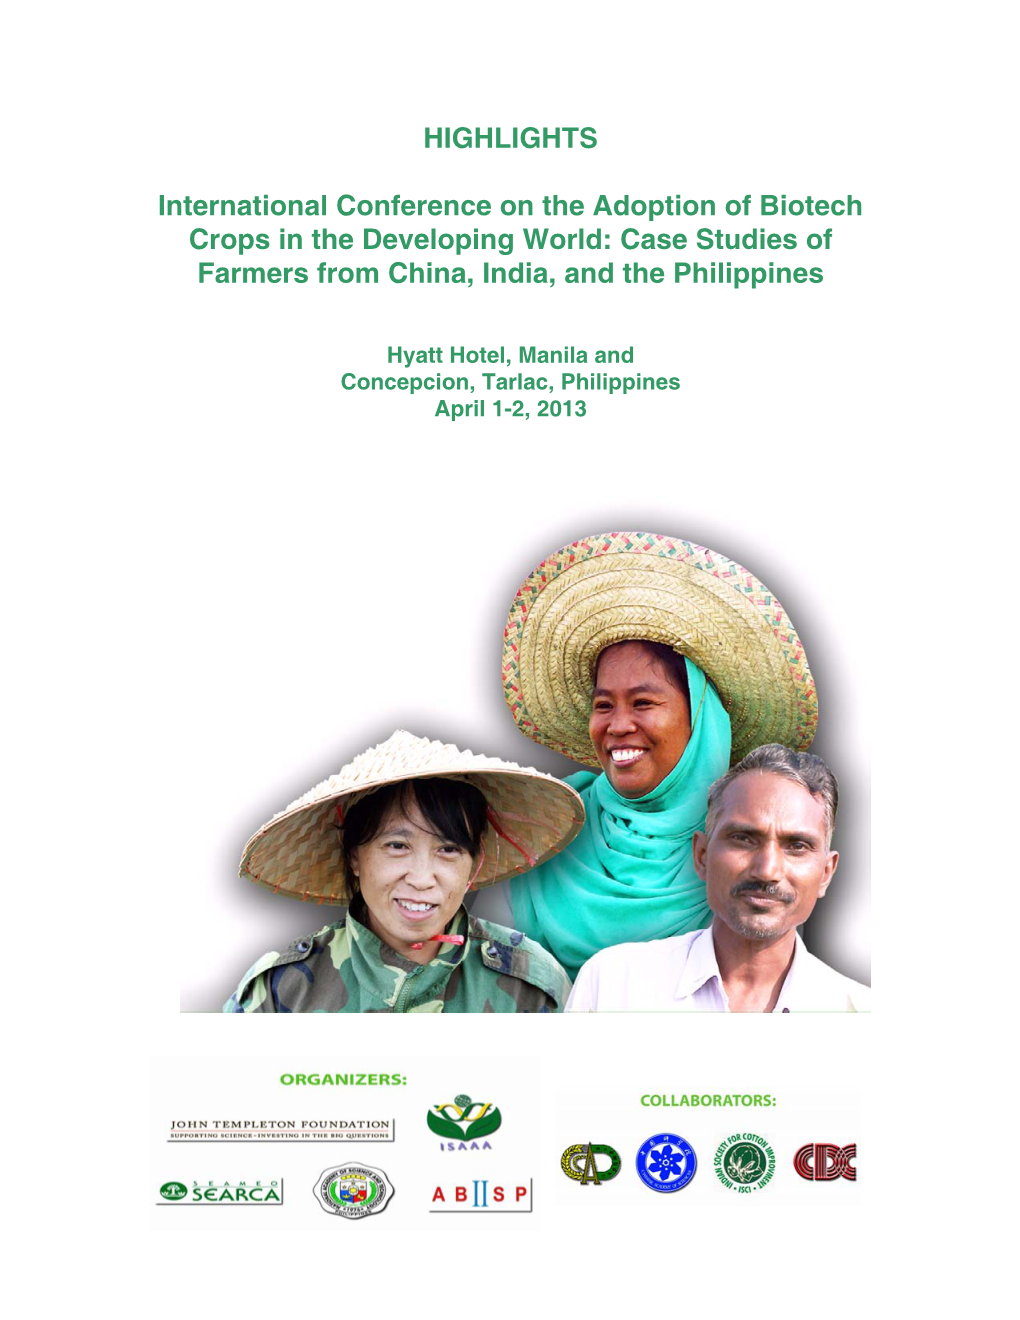 HIGHLIGHTS International Conference on The